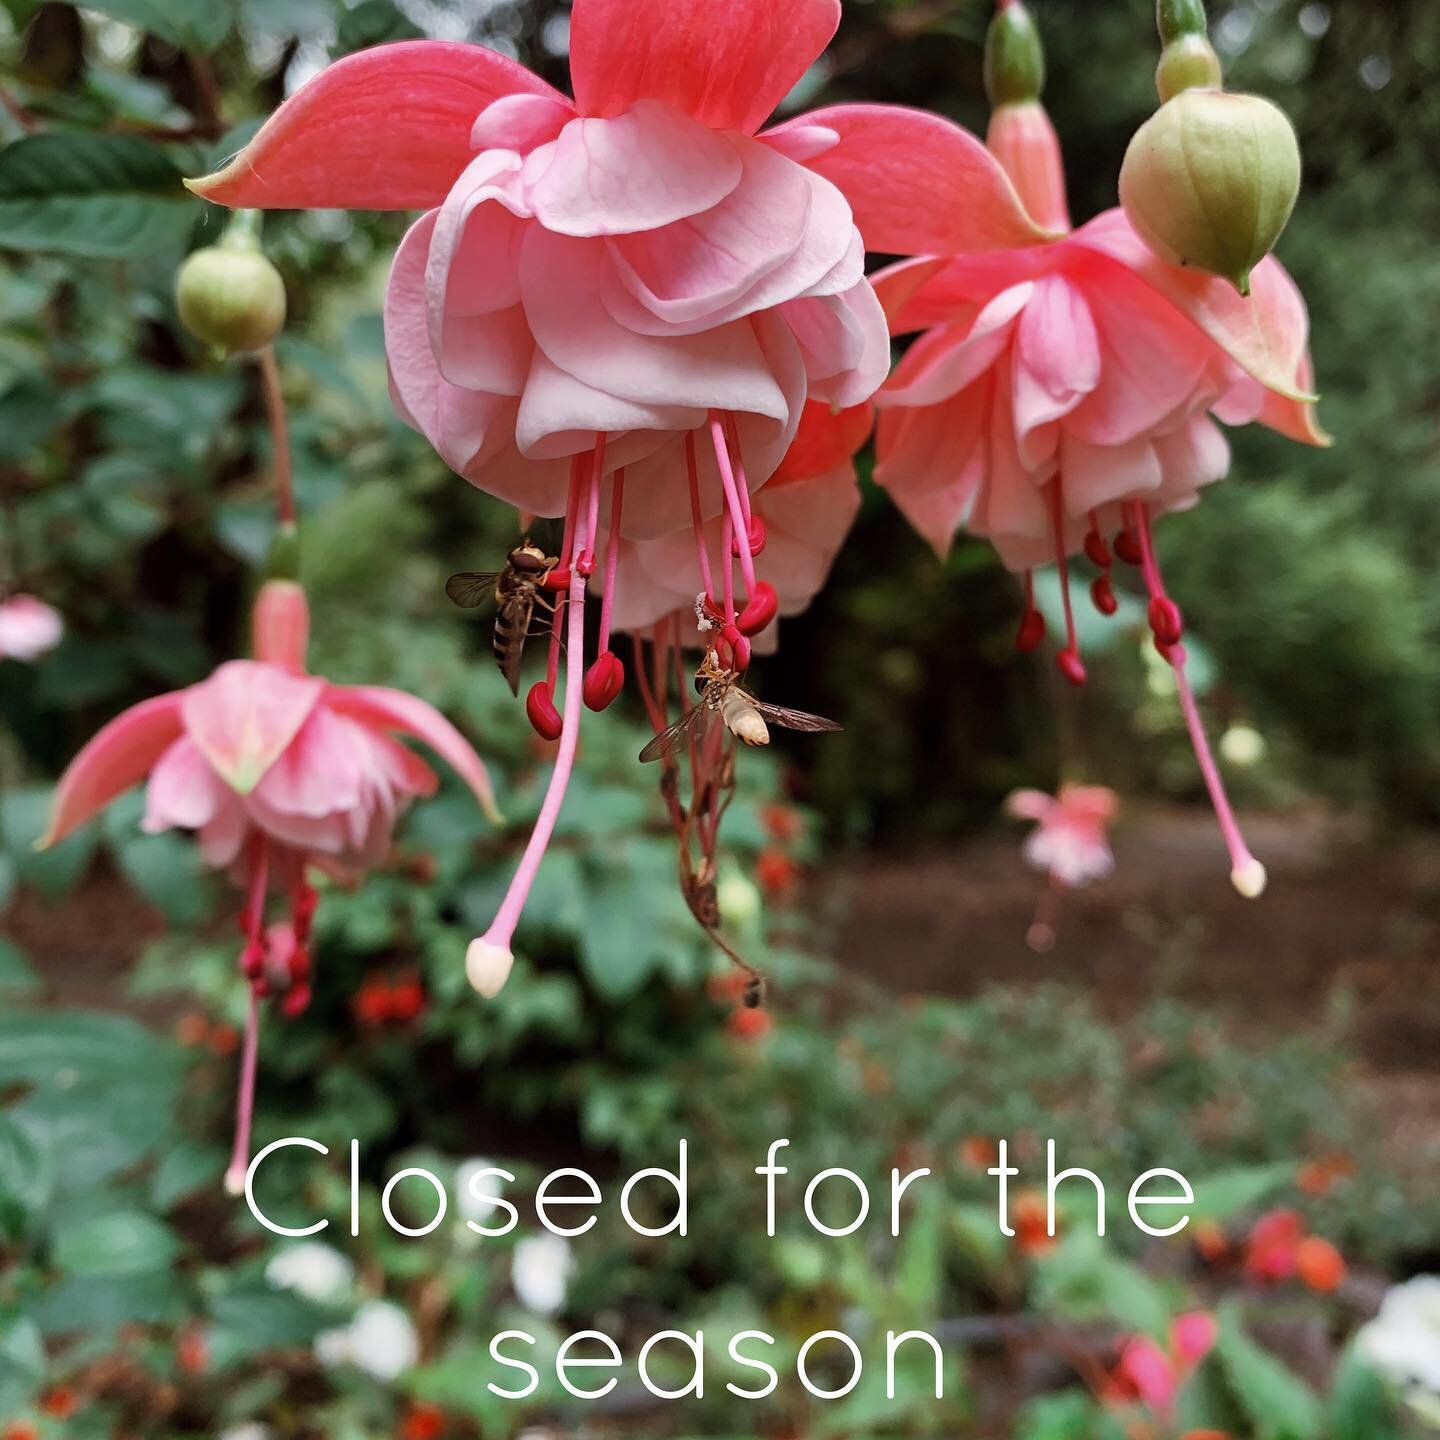 Our garden is now closed for the season to allow us some extra time for renovations before the rains come. We're accepting bookings for the 2021 event season and are happy to give private tours to anyone interested in reserving the gardens for their 